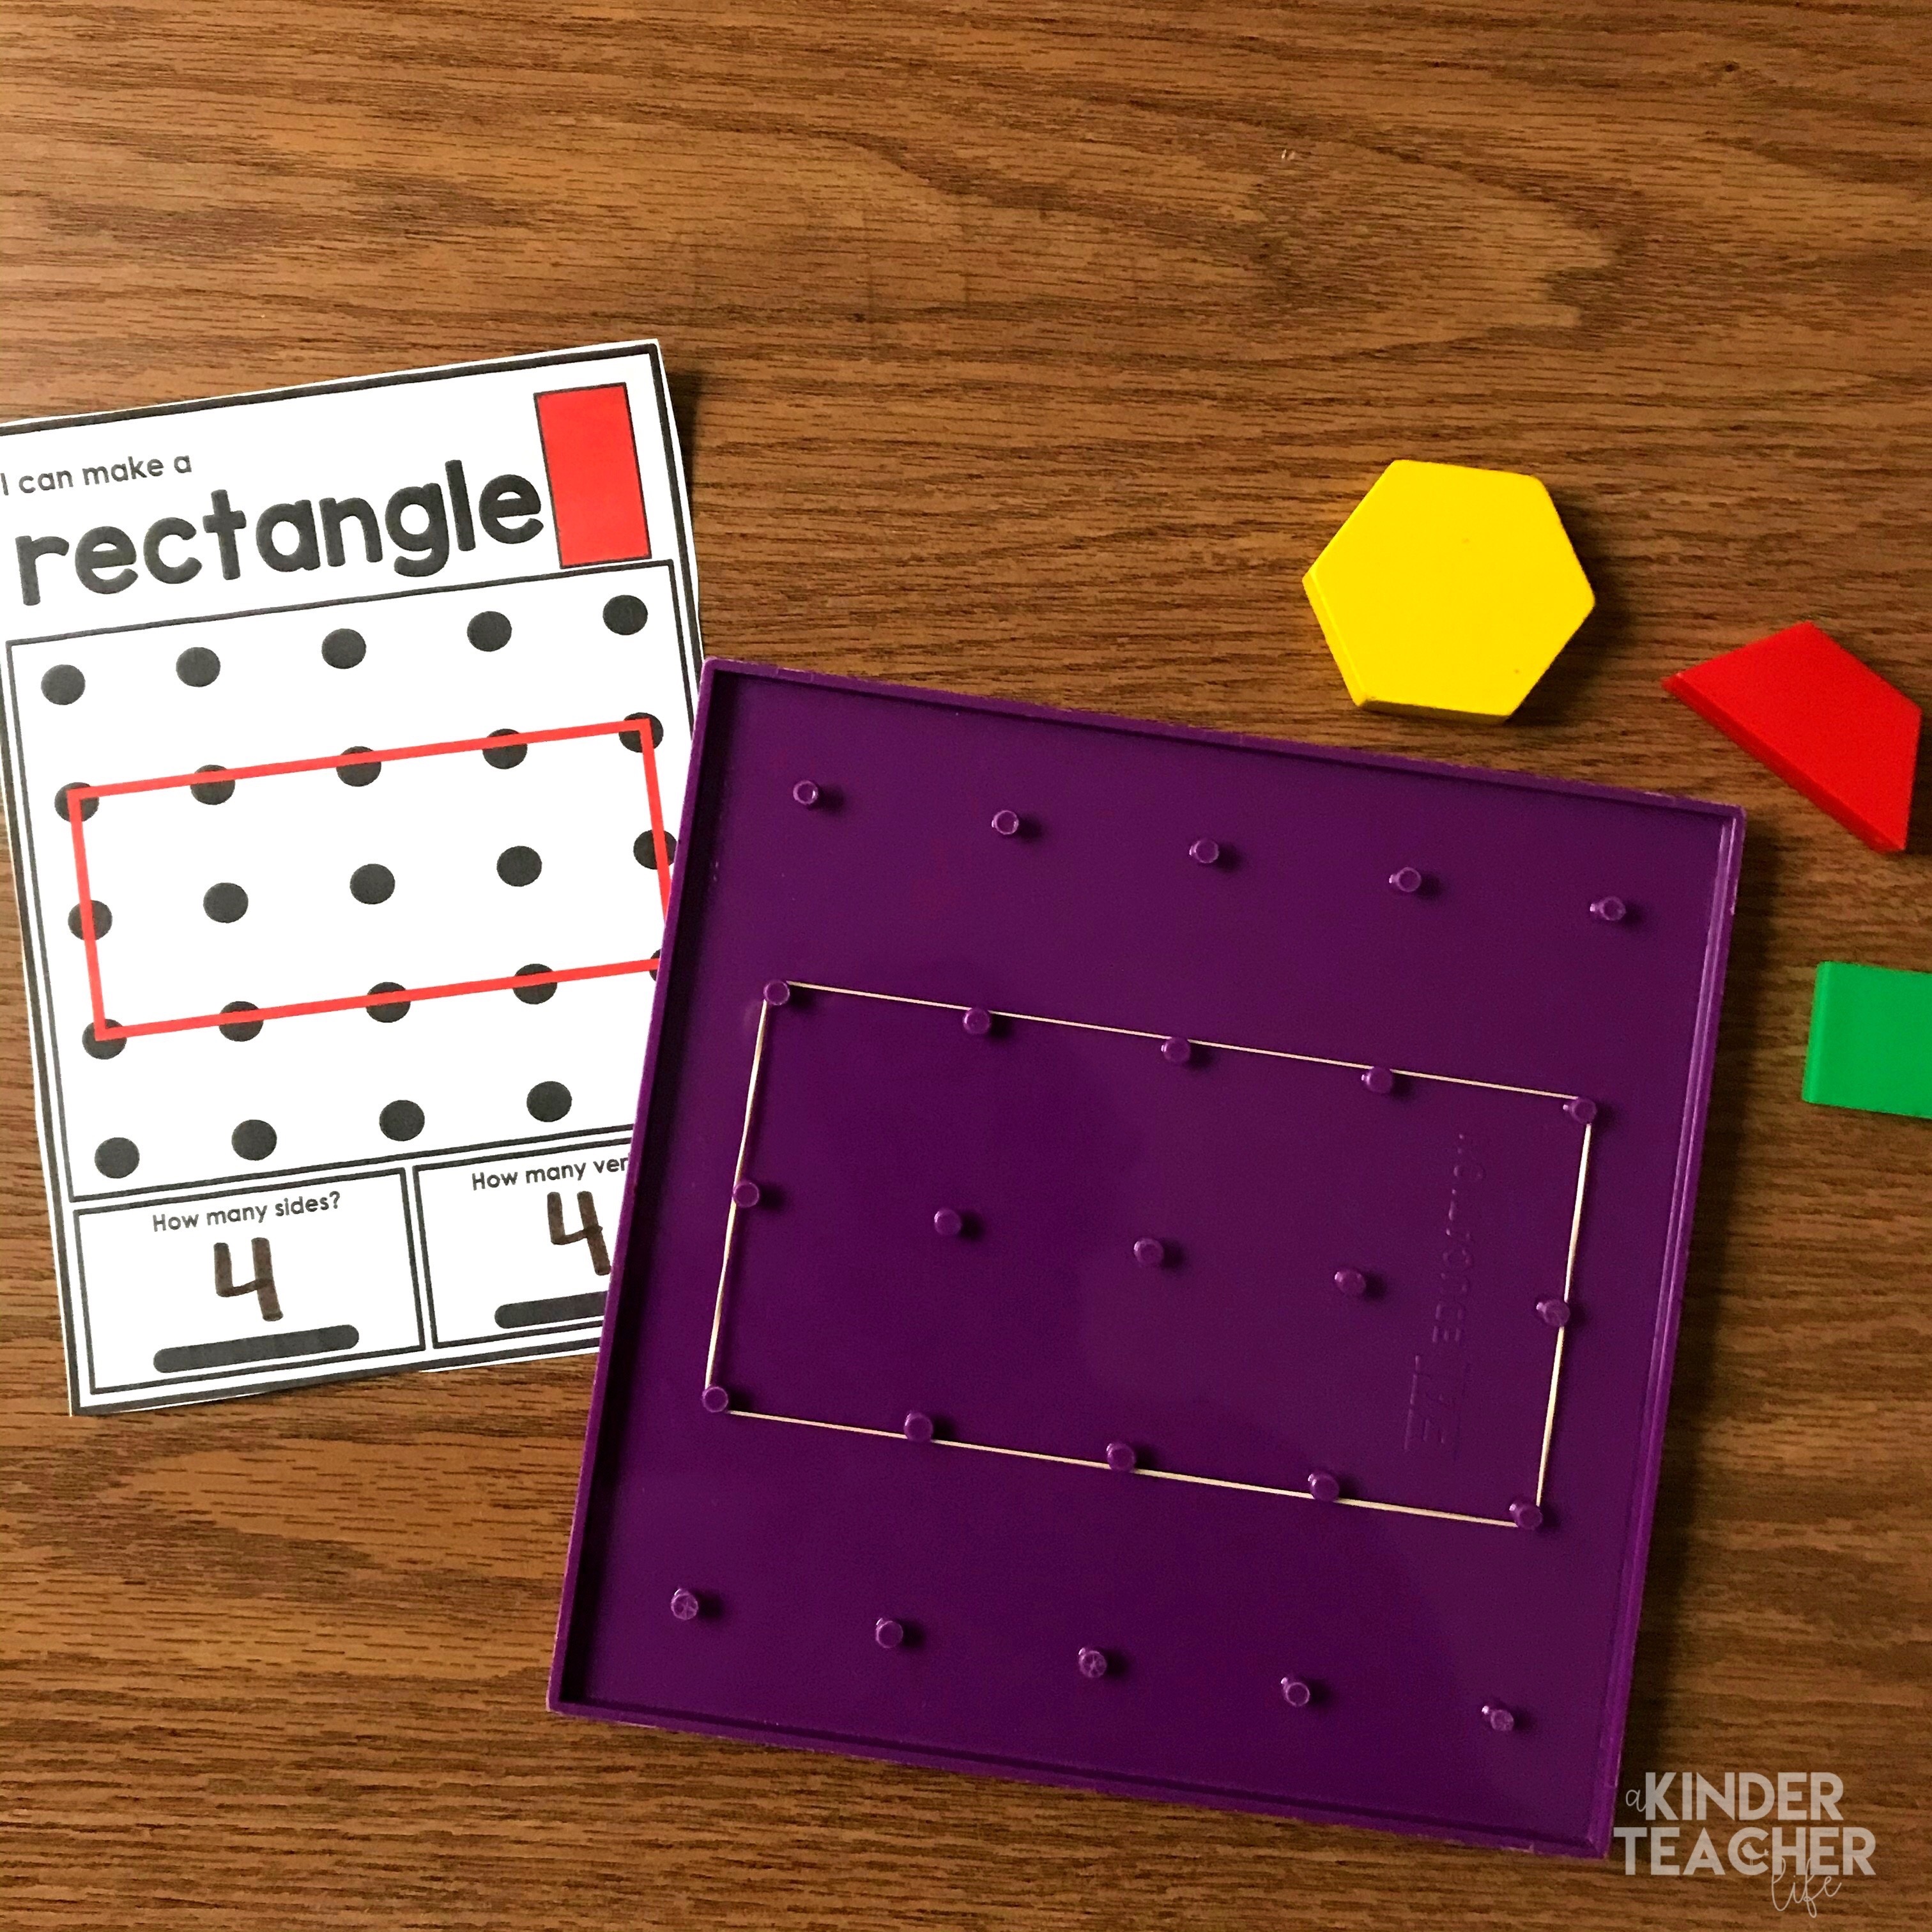 Create 2D shapes using Geoboards.